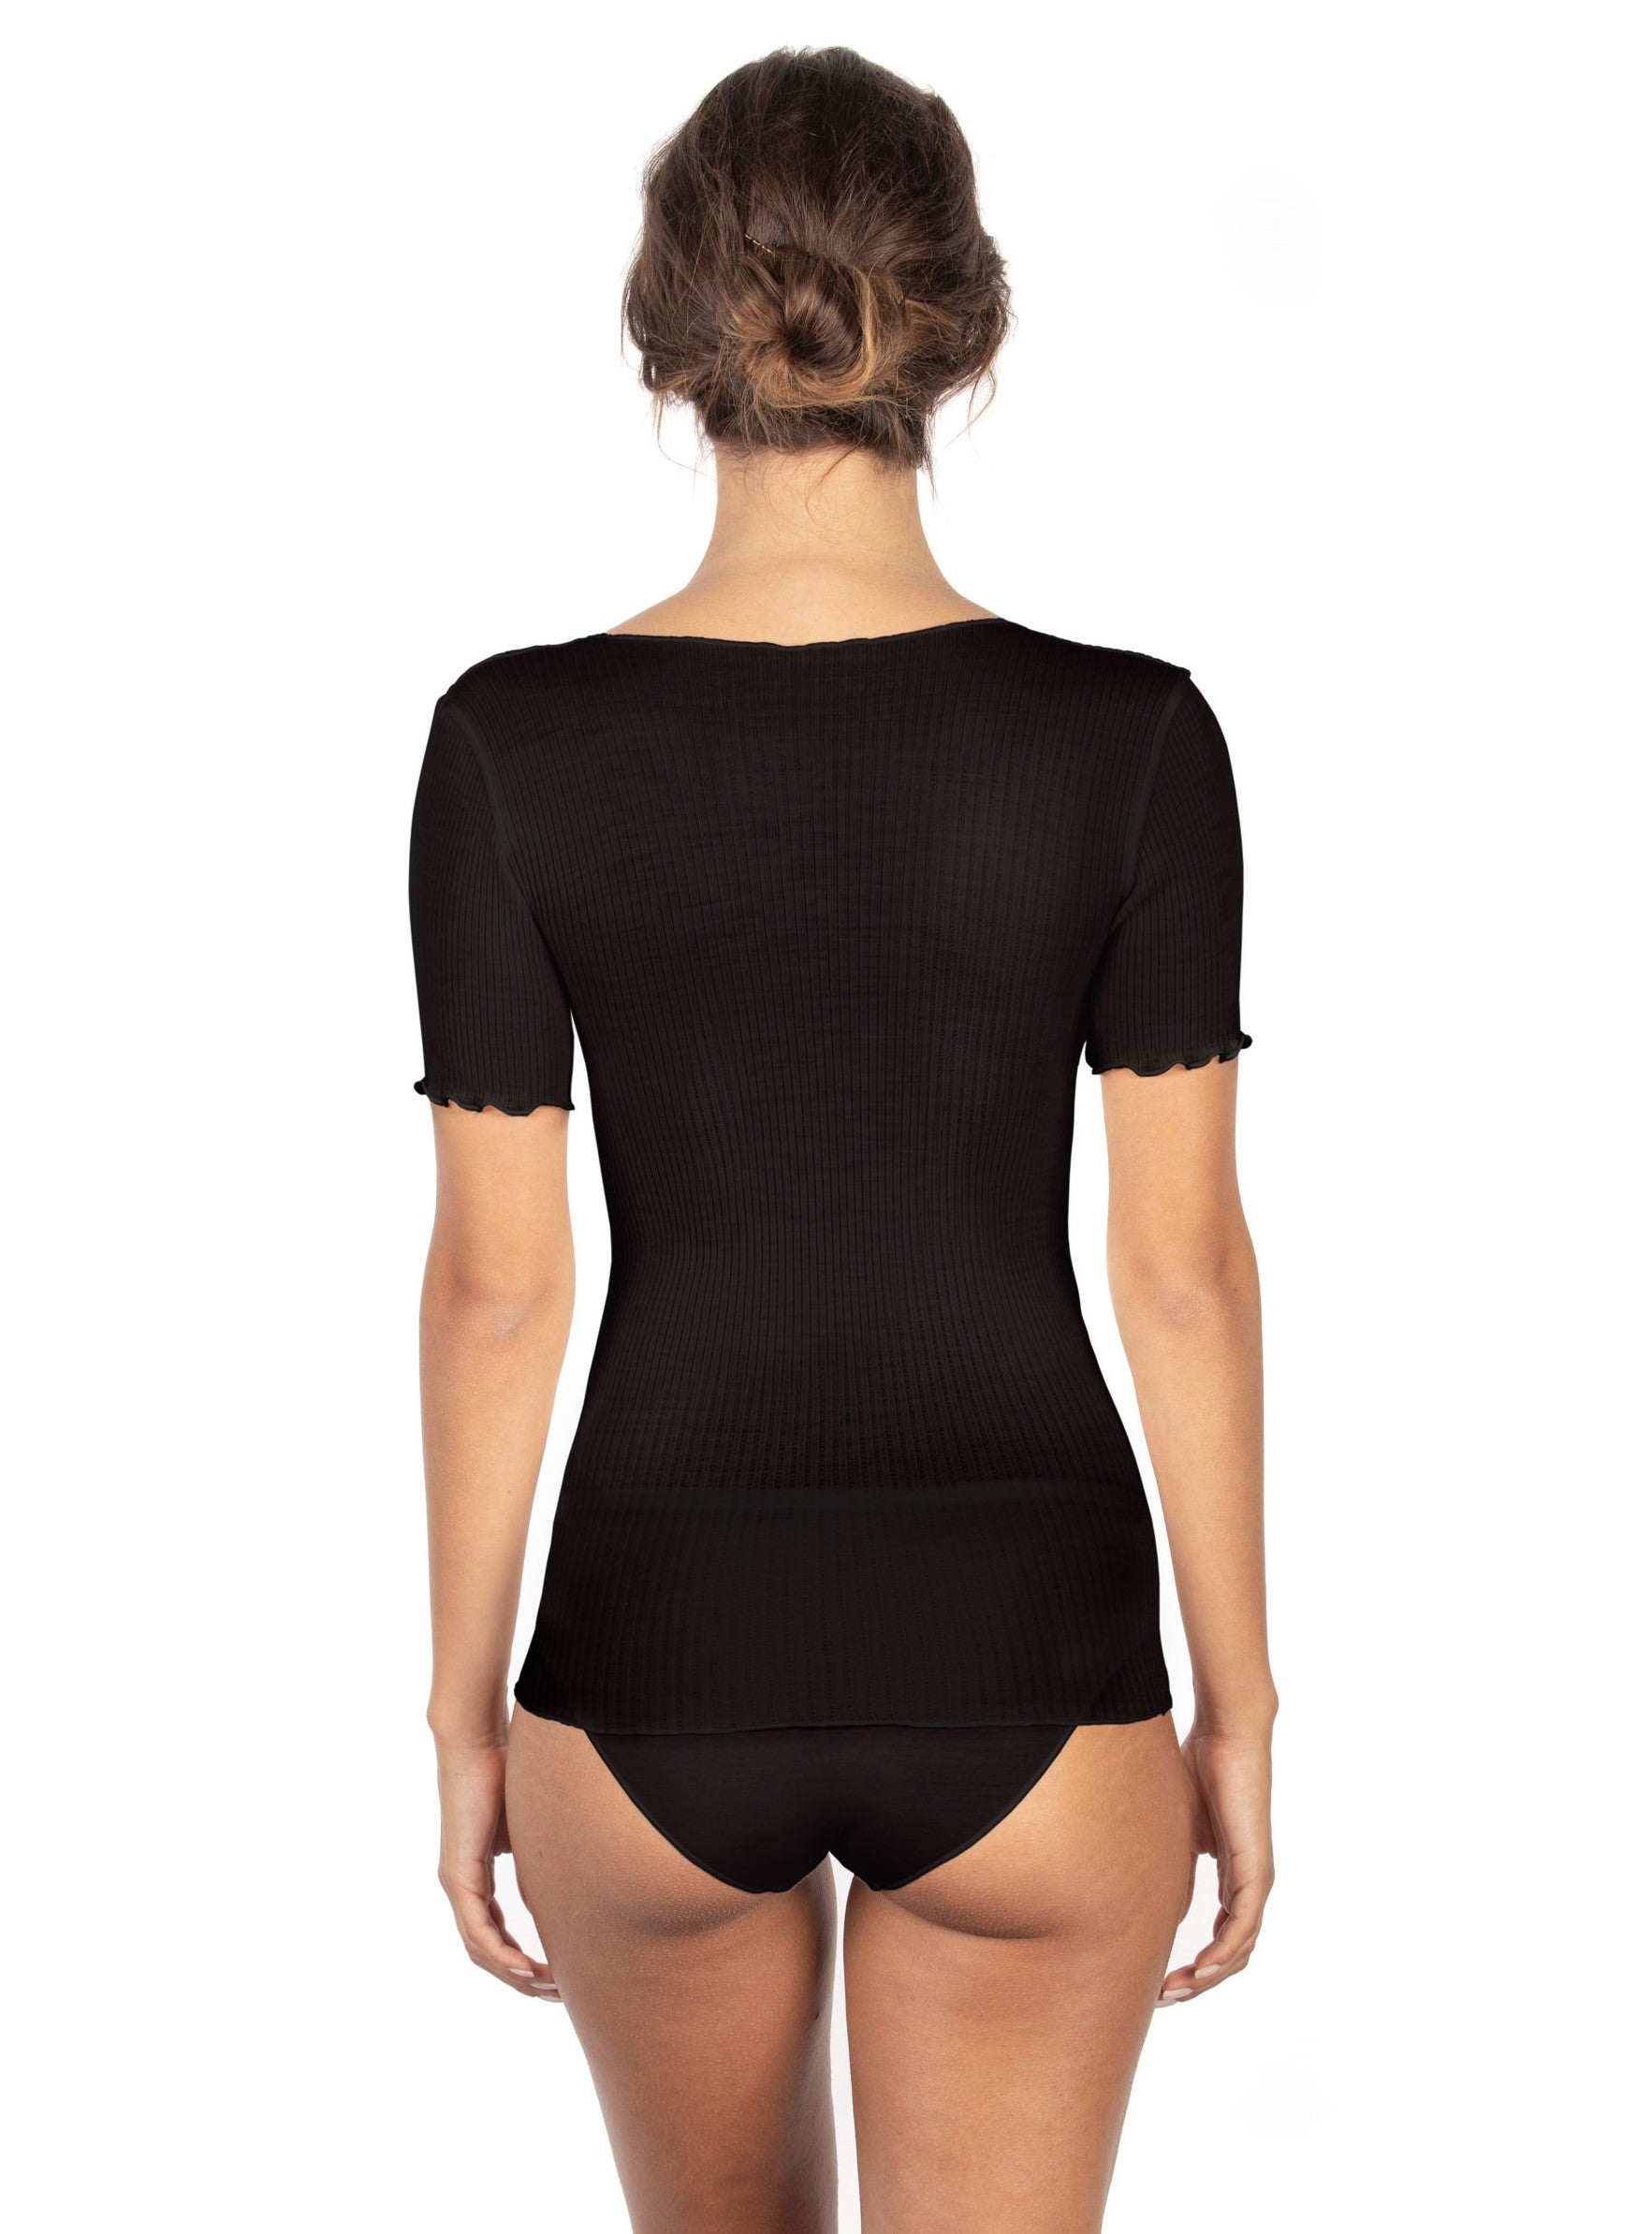 Black super soft short sleeve top from the Wool & Silk line by EGi from Italy at Di Moda Lingerie Toronto